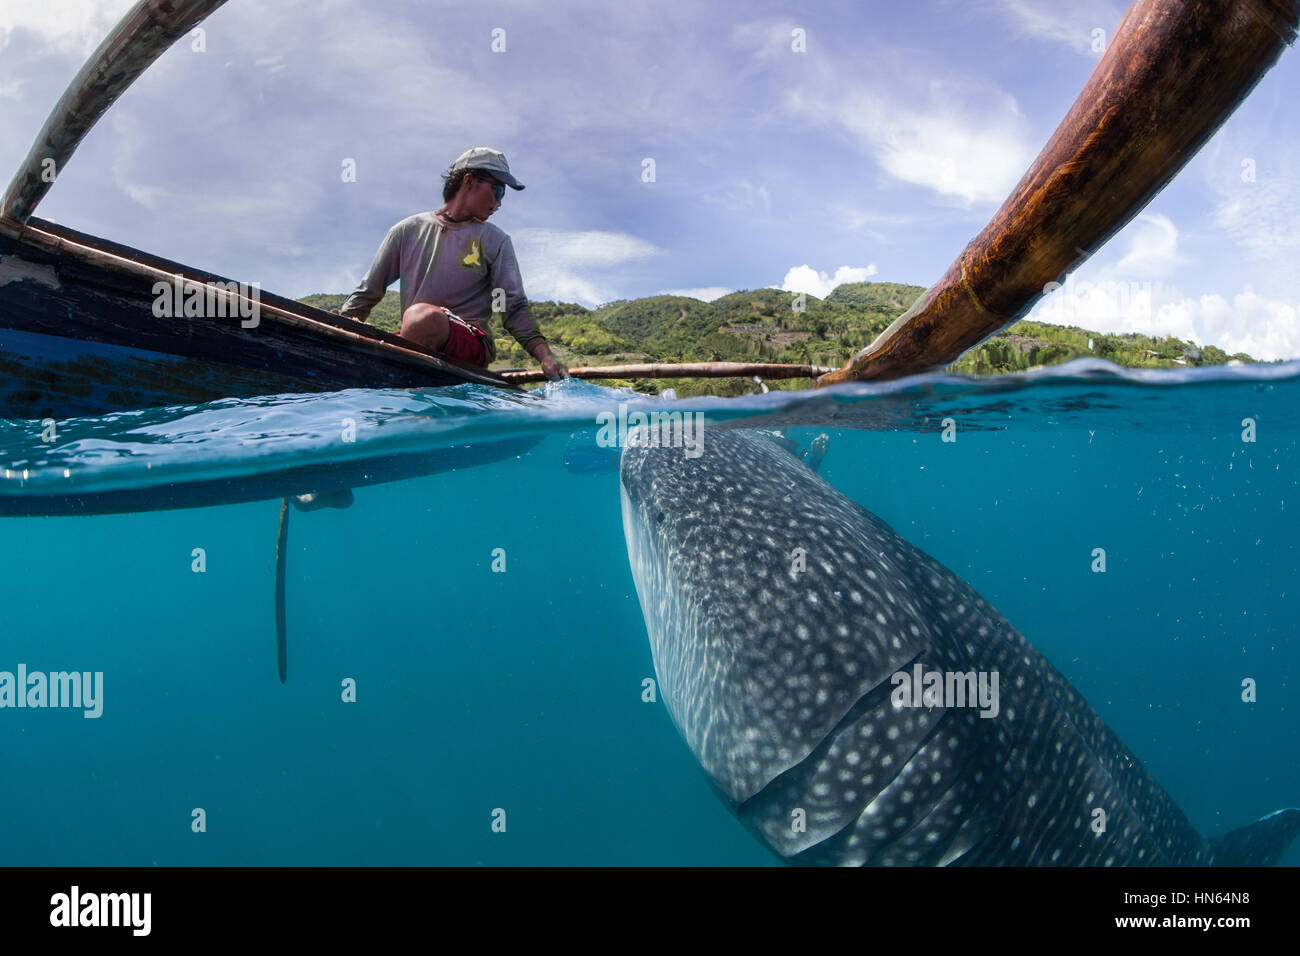 Whale shark encounter with local fisherman at village of Oslob, on the island of Cebu, Philippines. Stock Photo